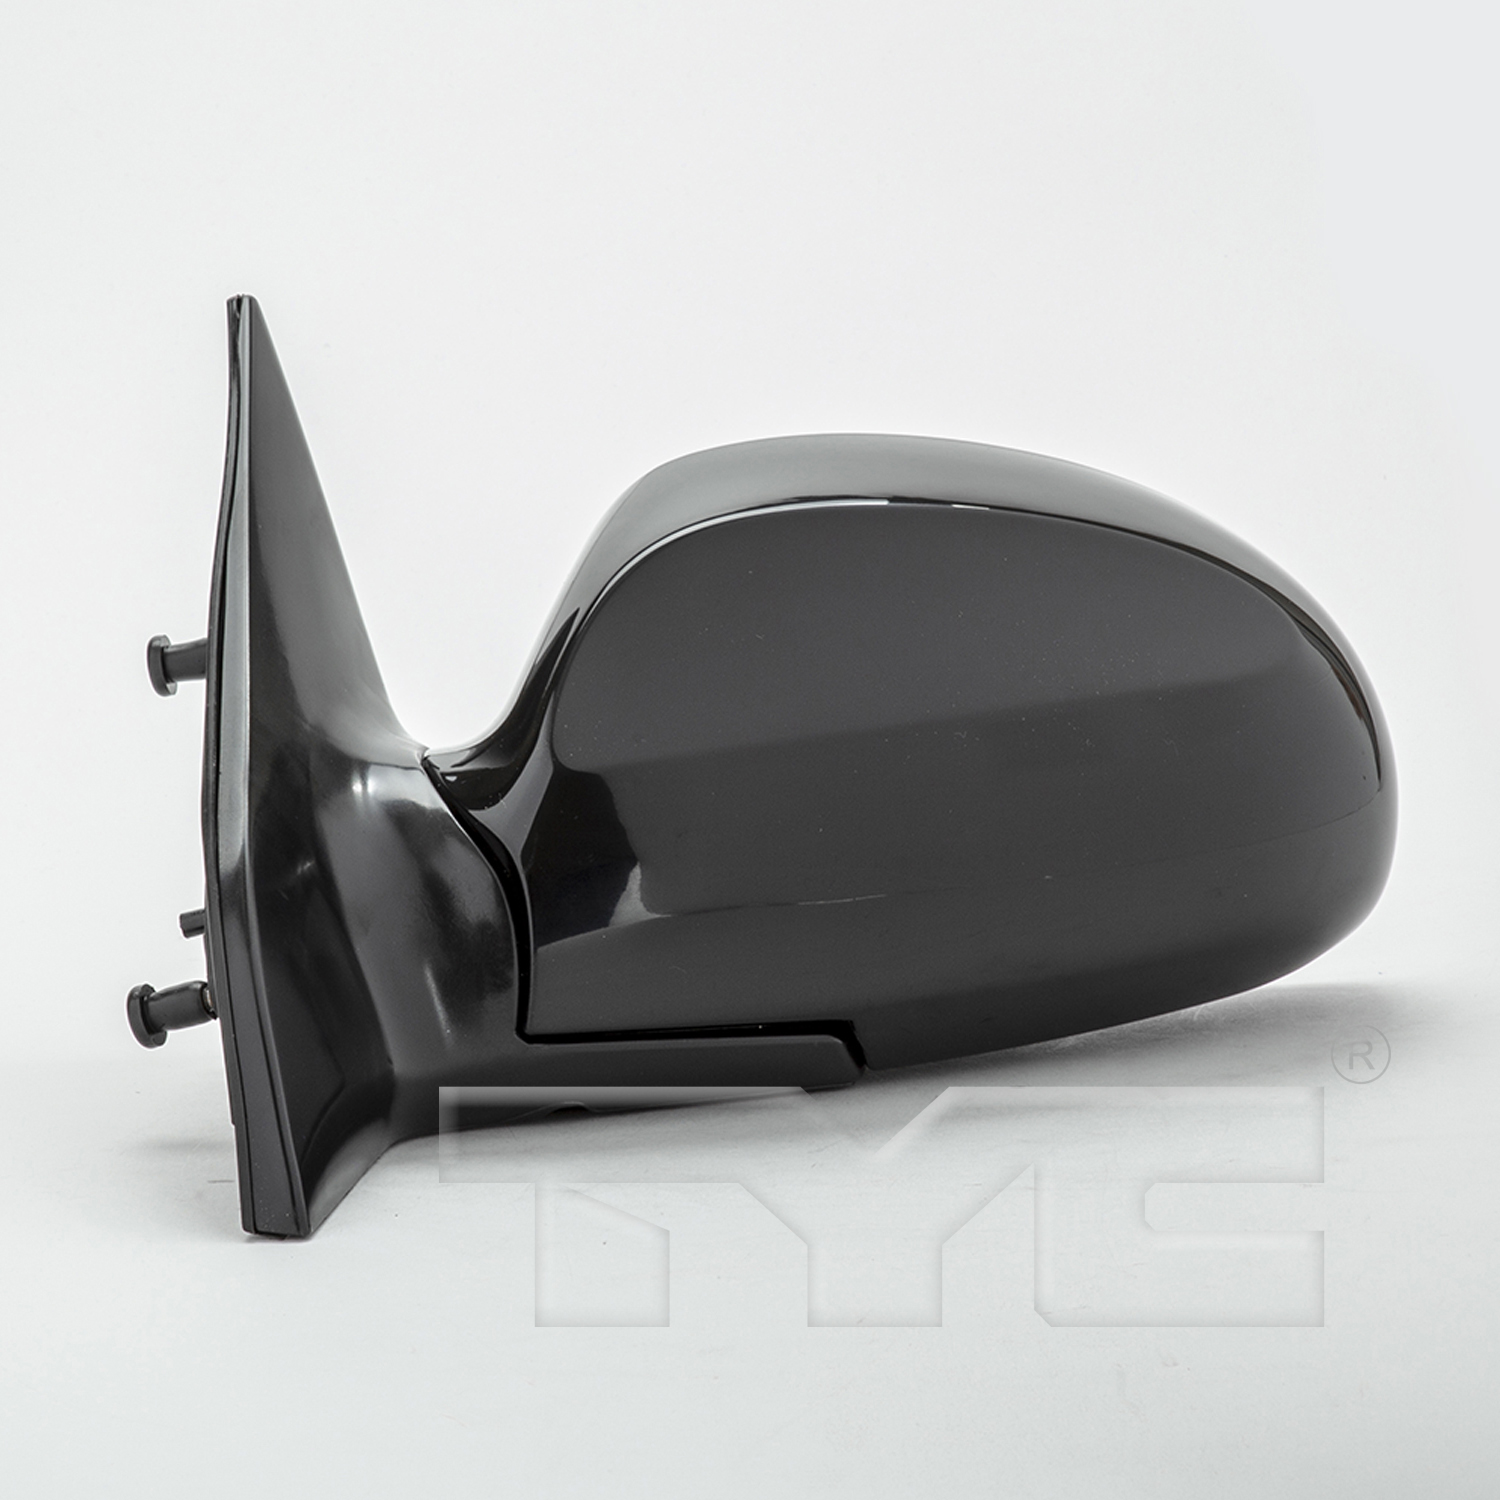 Aftermarket MIRRORS for KIA - SPECTRA, SPECTRA,04-09,LT Mirror outside rear view